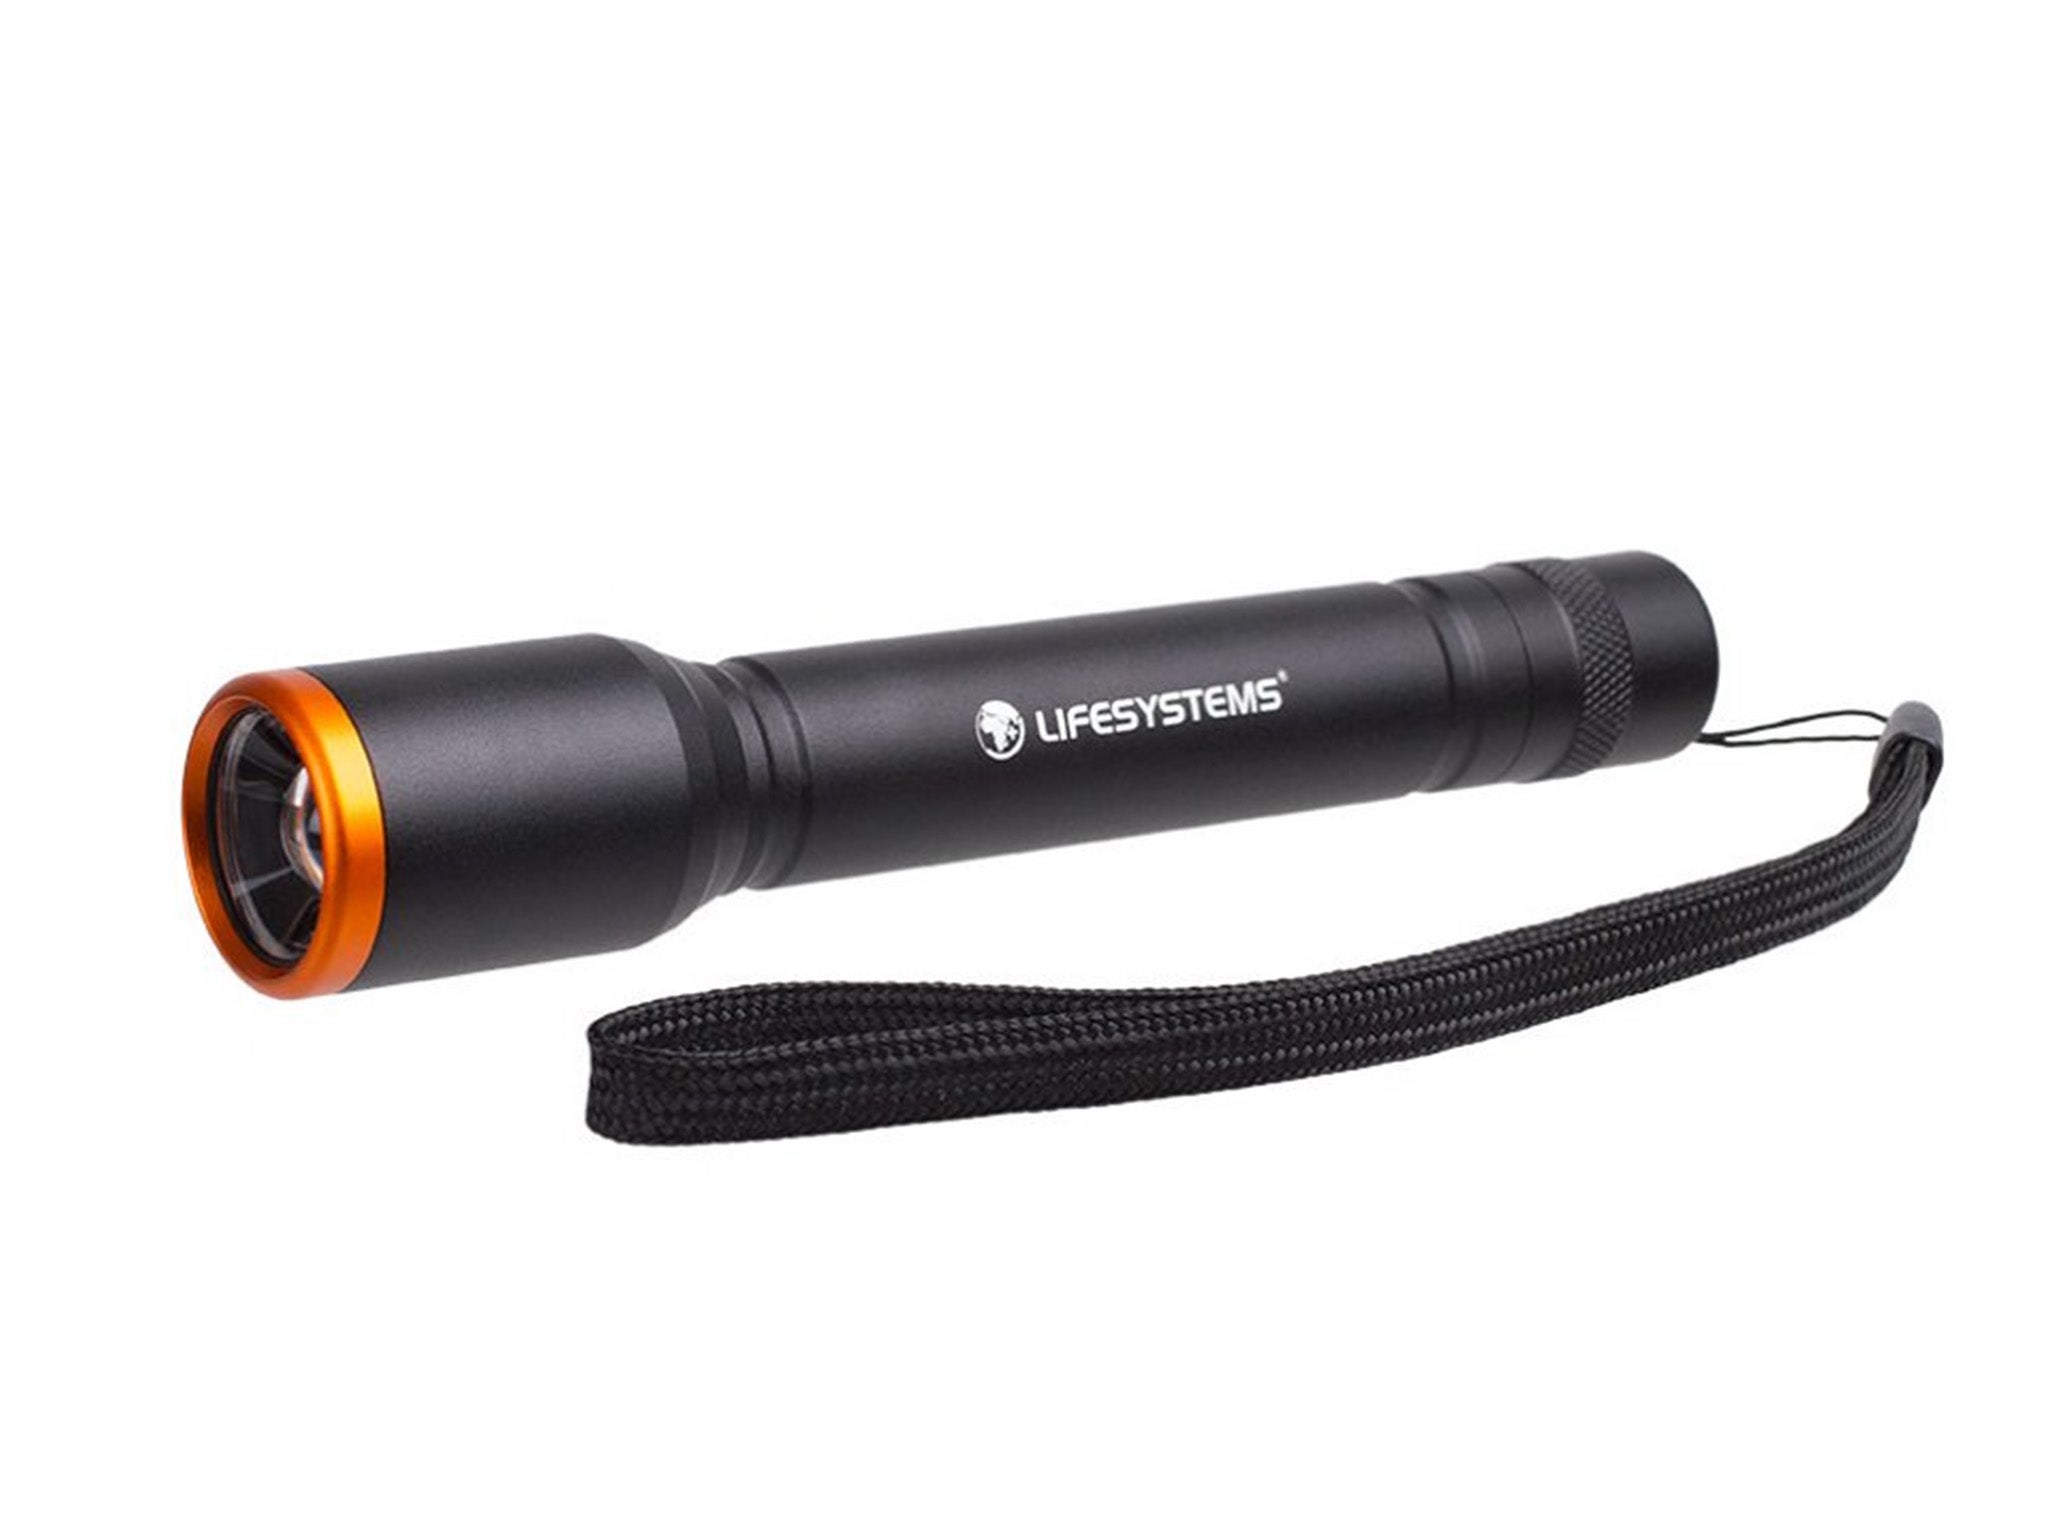 Life Systems intensity 370 hand torch.jpg